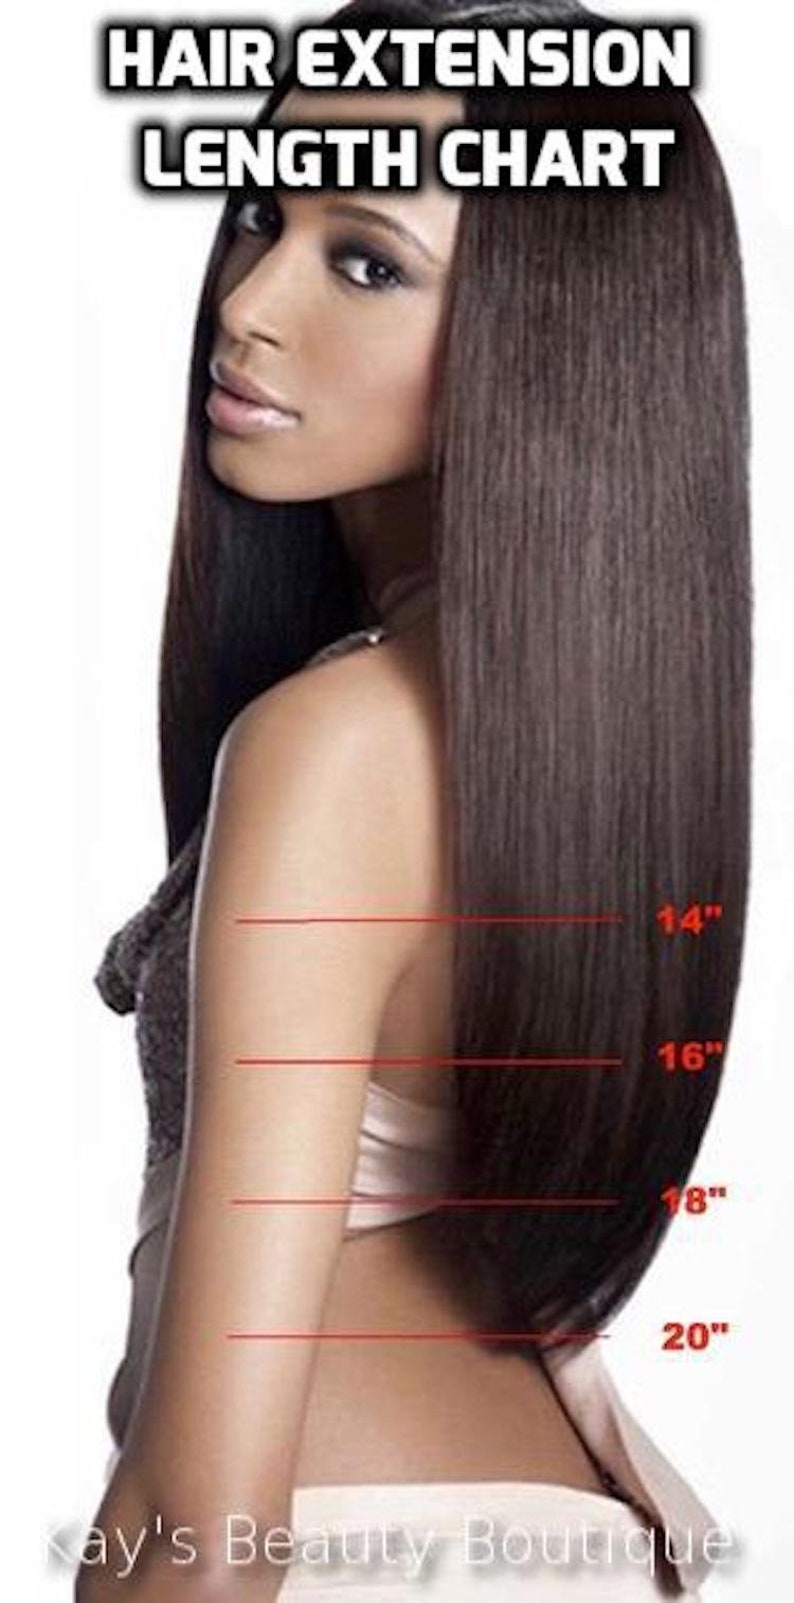 100% Human Hair Golden Blonde Mix Highlights Strip Clip-in extension streaks 1pc image 6